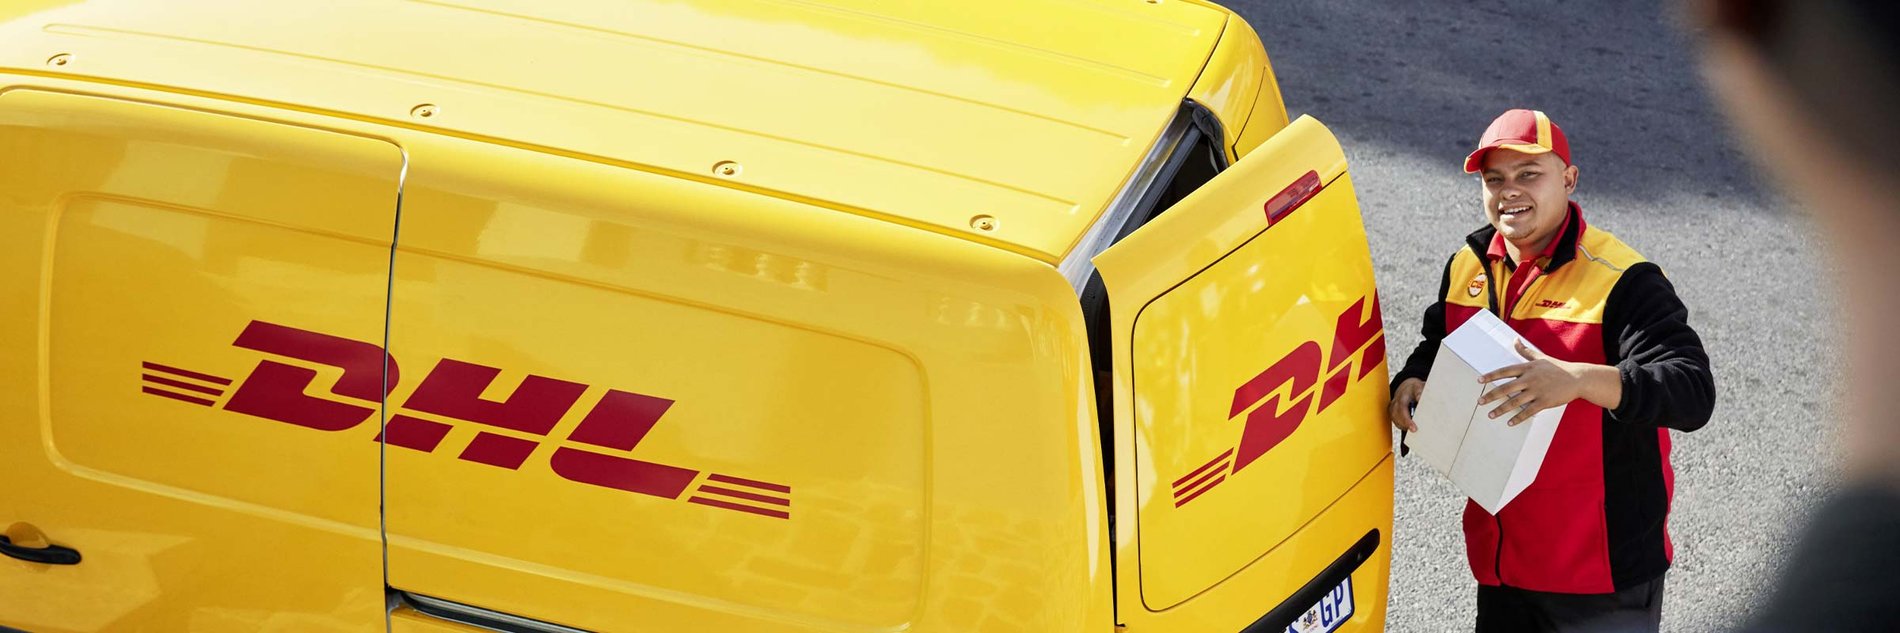 International Shipping Services in Vancouver, BC | DHL Express